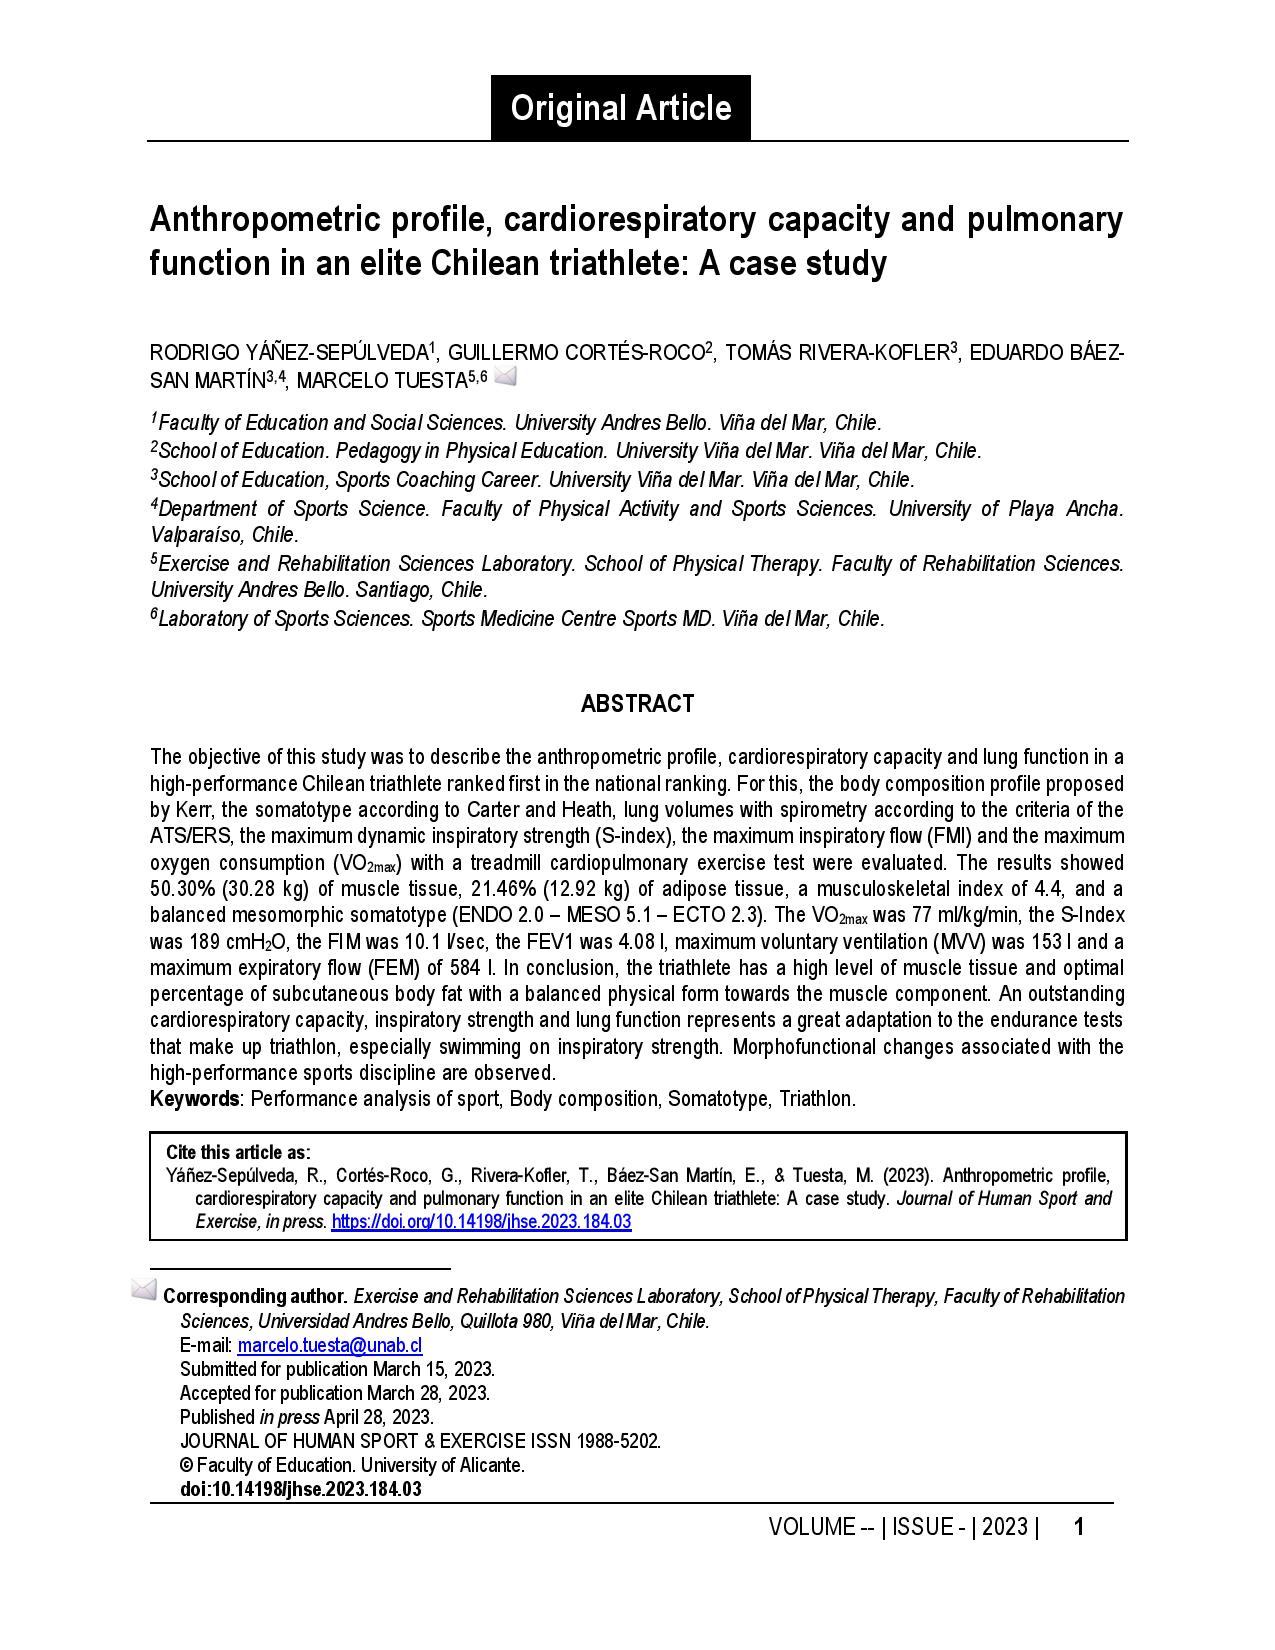 Anthropometric profile, cardiorespiratory capacity and pulmonary function in an elite Chilean triathlete: A case study